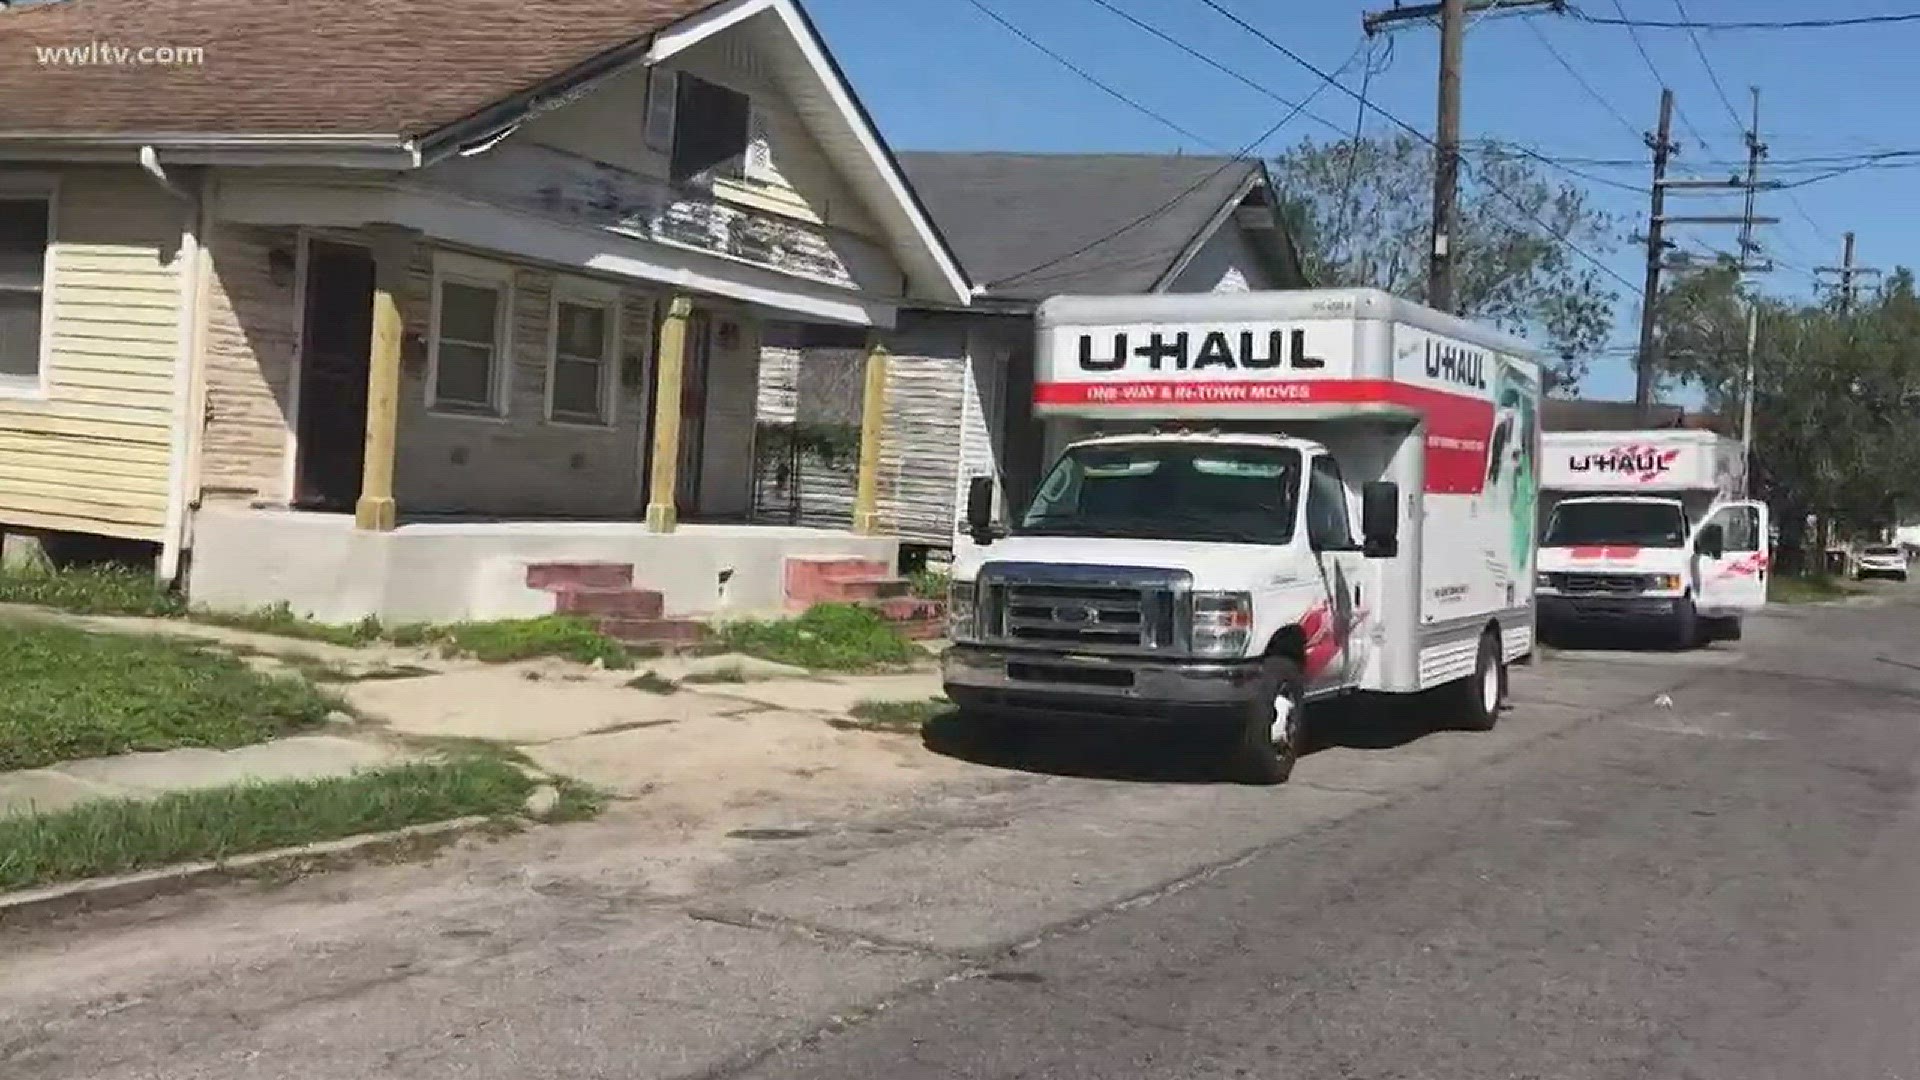 UHaul couldn't give WWL specific numbers, but Reese says he was told this was the third UHaul stolen this week in New Orleans.